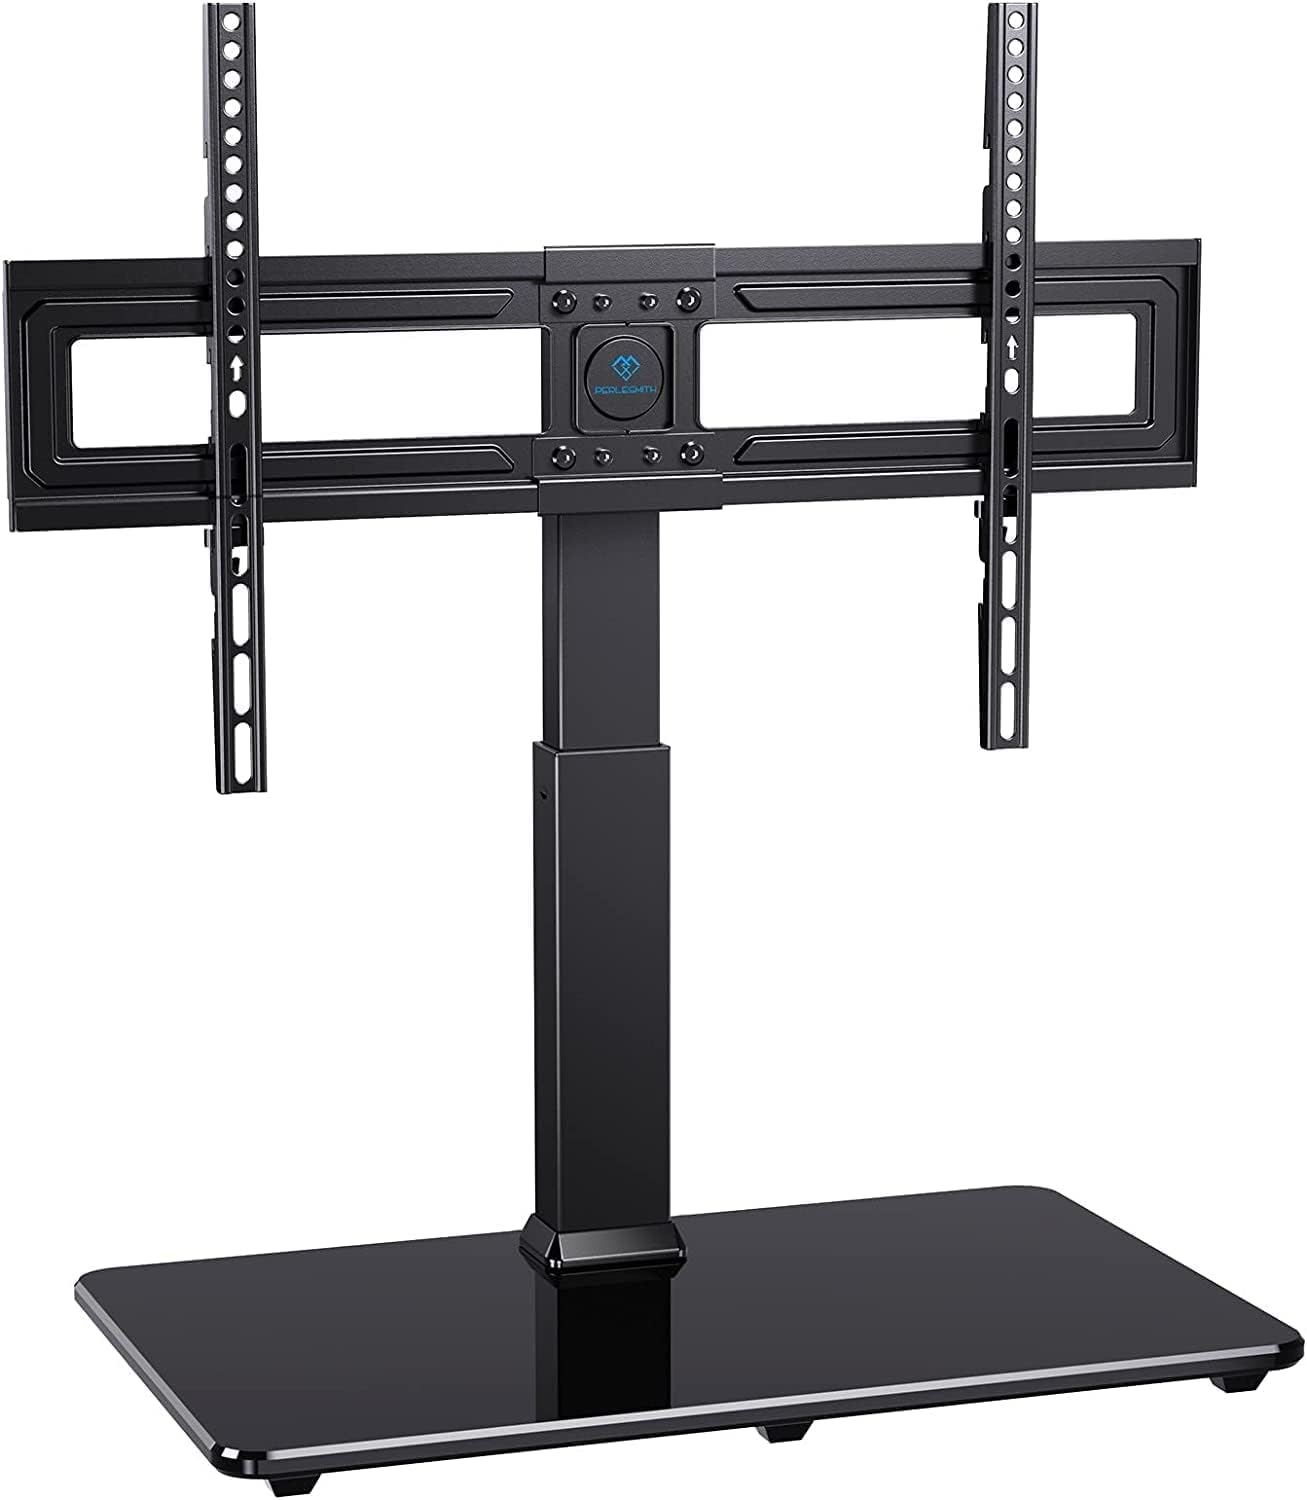 PERLESMITH Swivel Universal TV Stand for 37-65,70,75 inch LCD OLED Flat/Curved Screen TVs-Height Adjustable Table Top Center TV Stand with Wire Management, VESA 600x400mmup to 88lbs